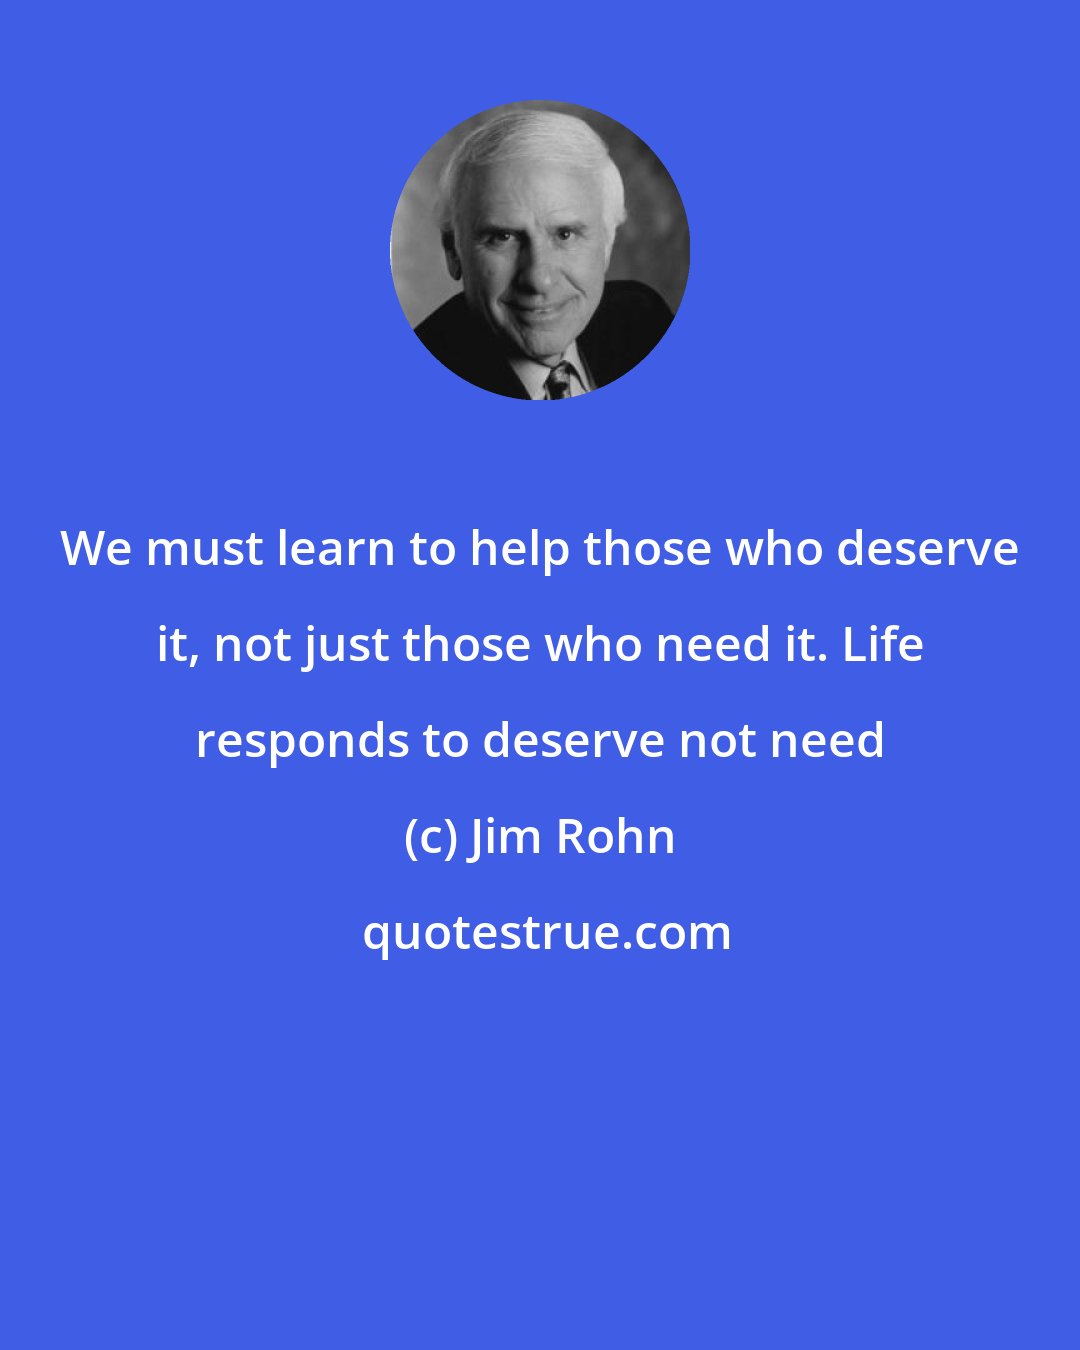 Jim Rohn: We must learn to help those who deserve it, not just those who need it. Life responds to deserve not need